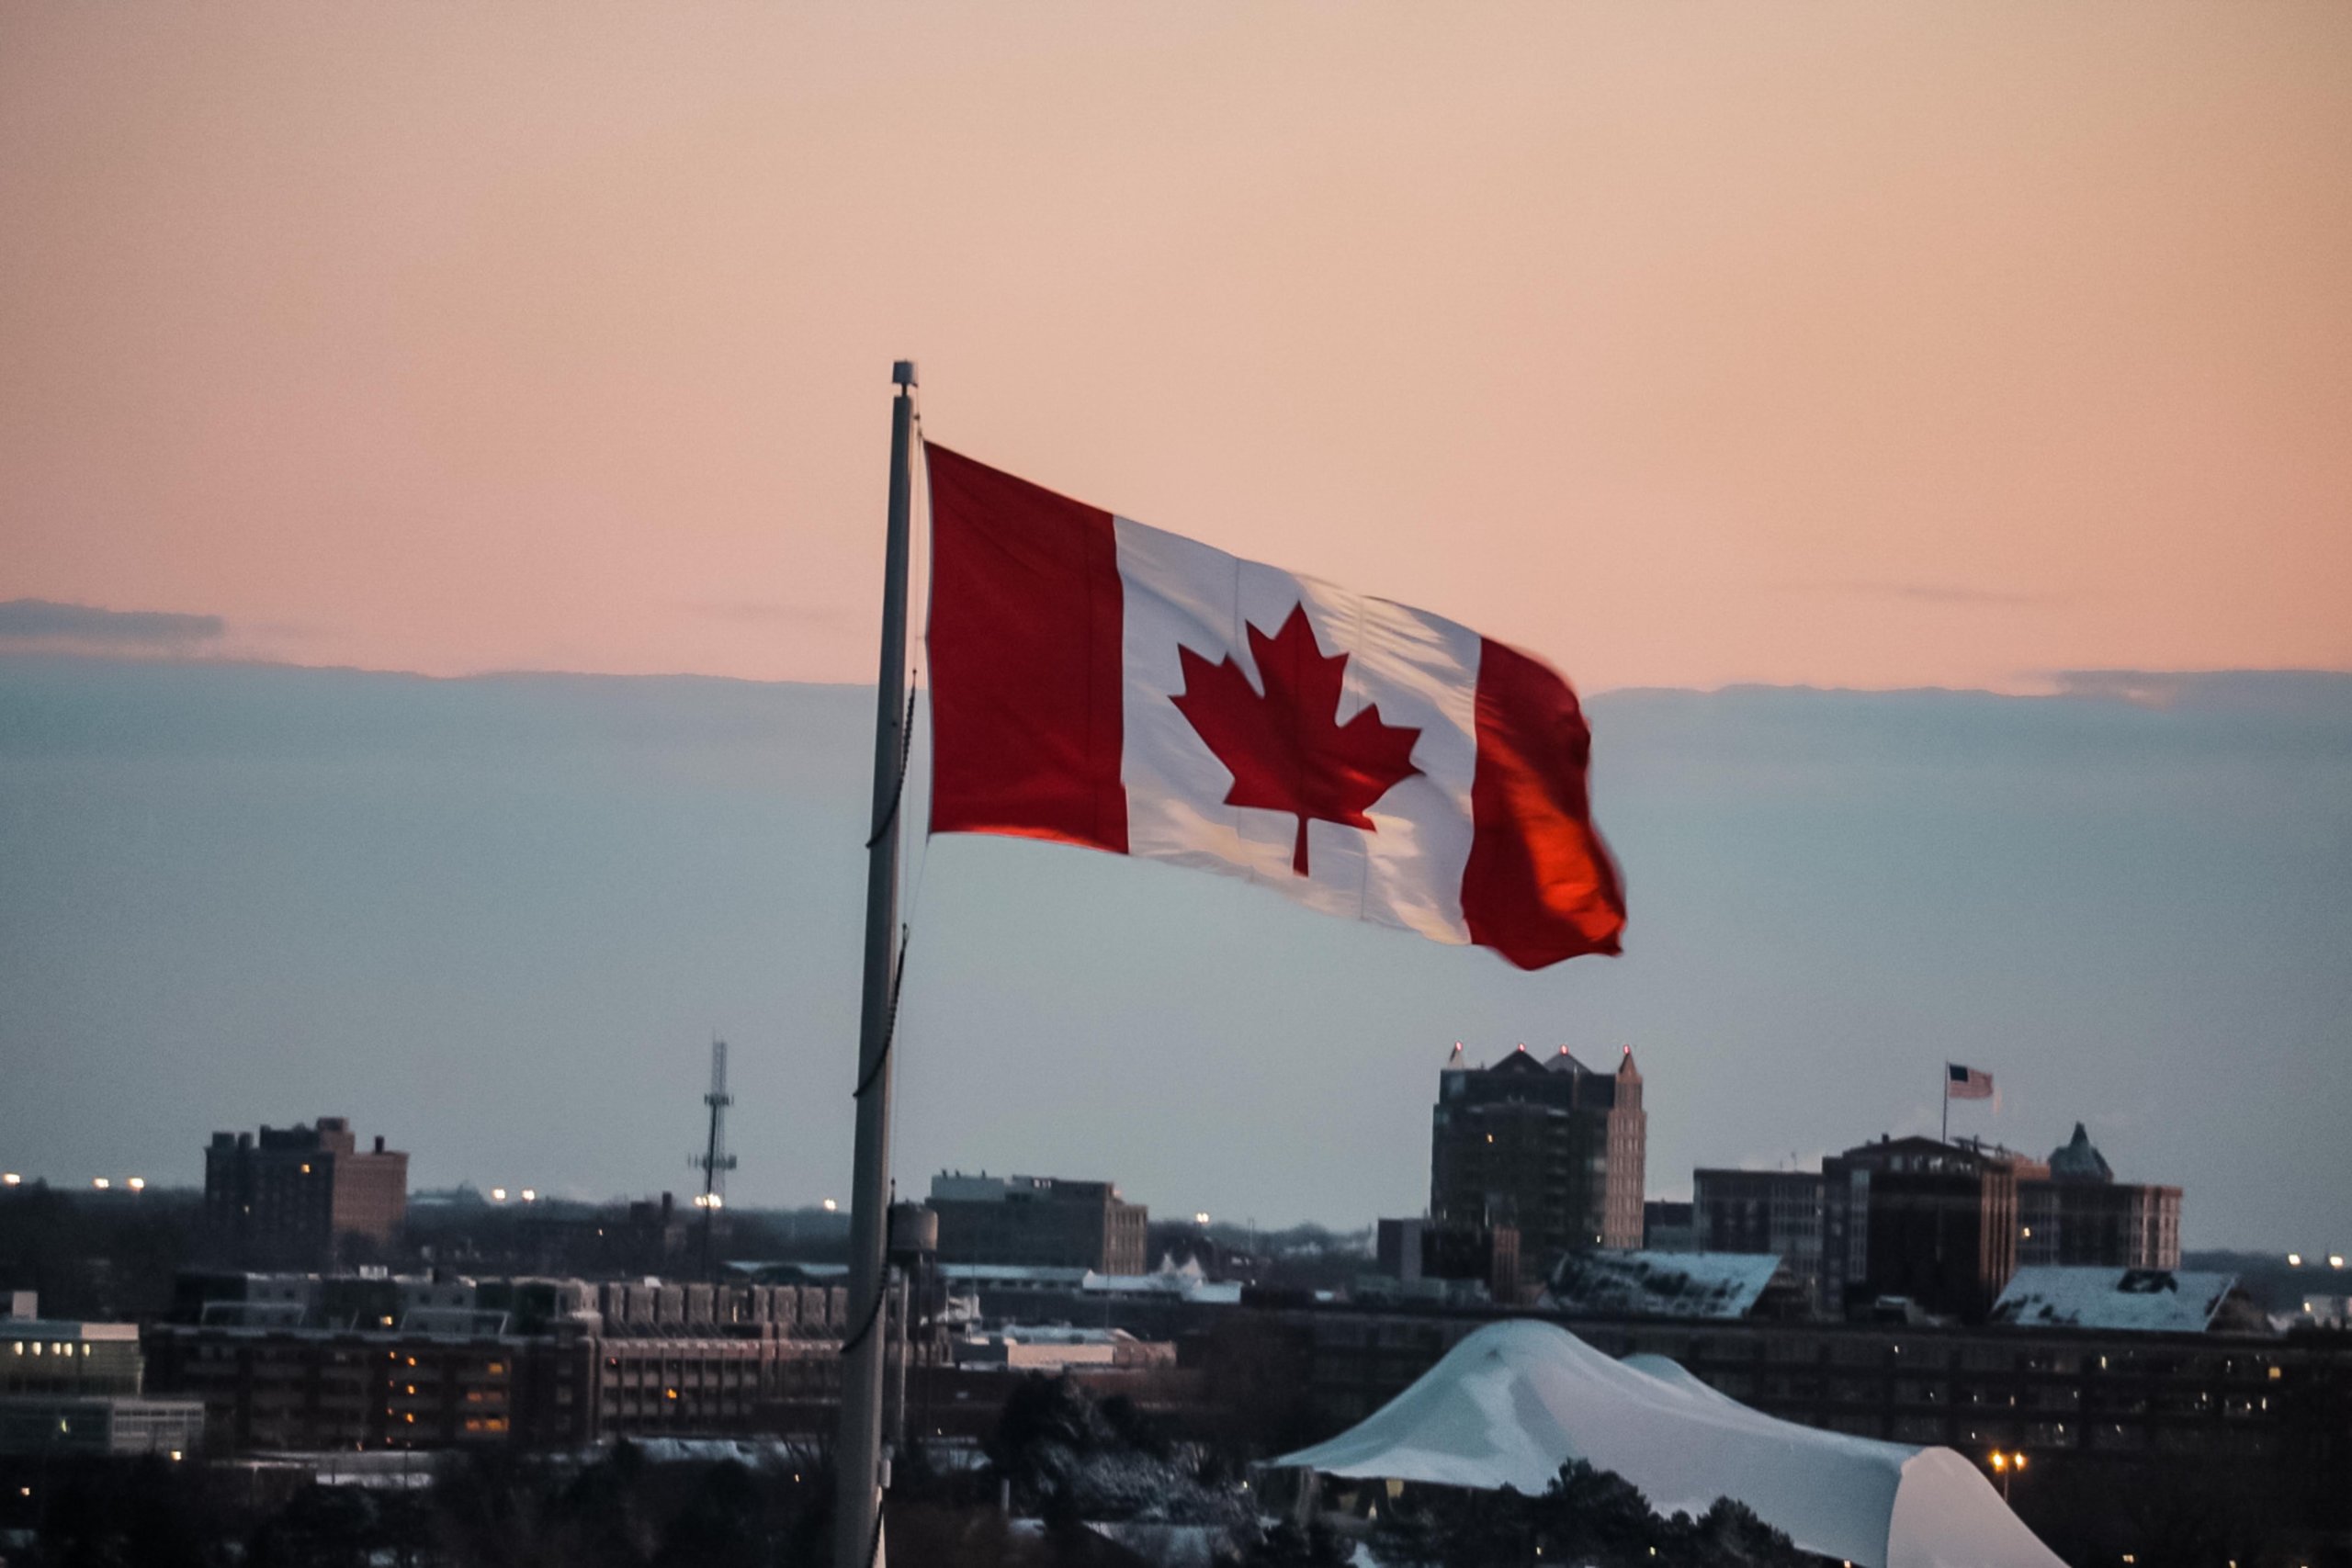 Image of Canadian flag flying with pink sky and city line in background